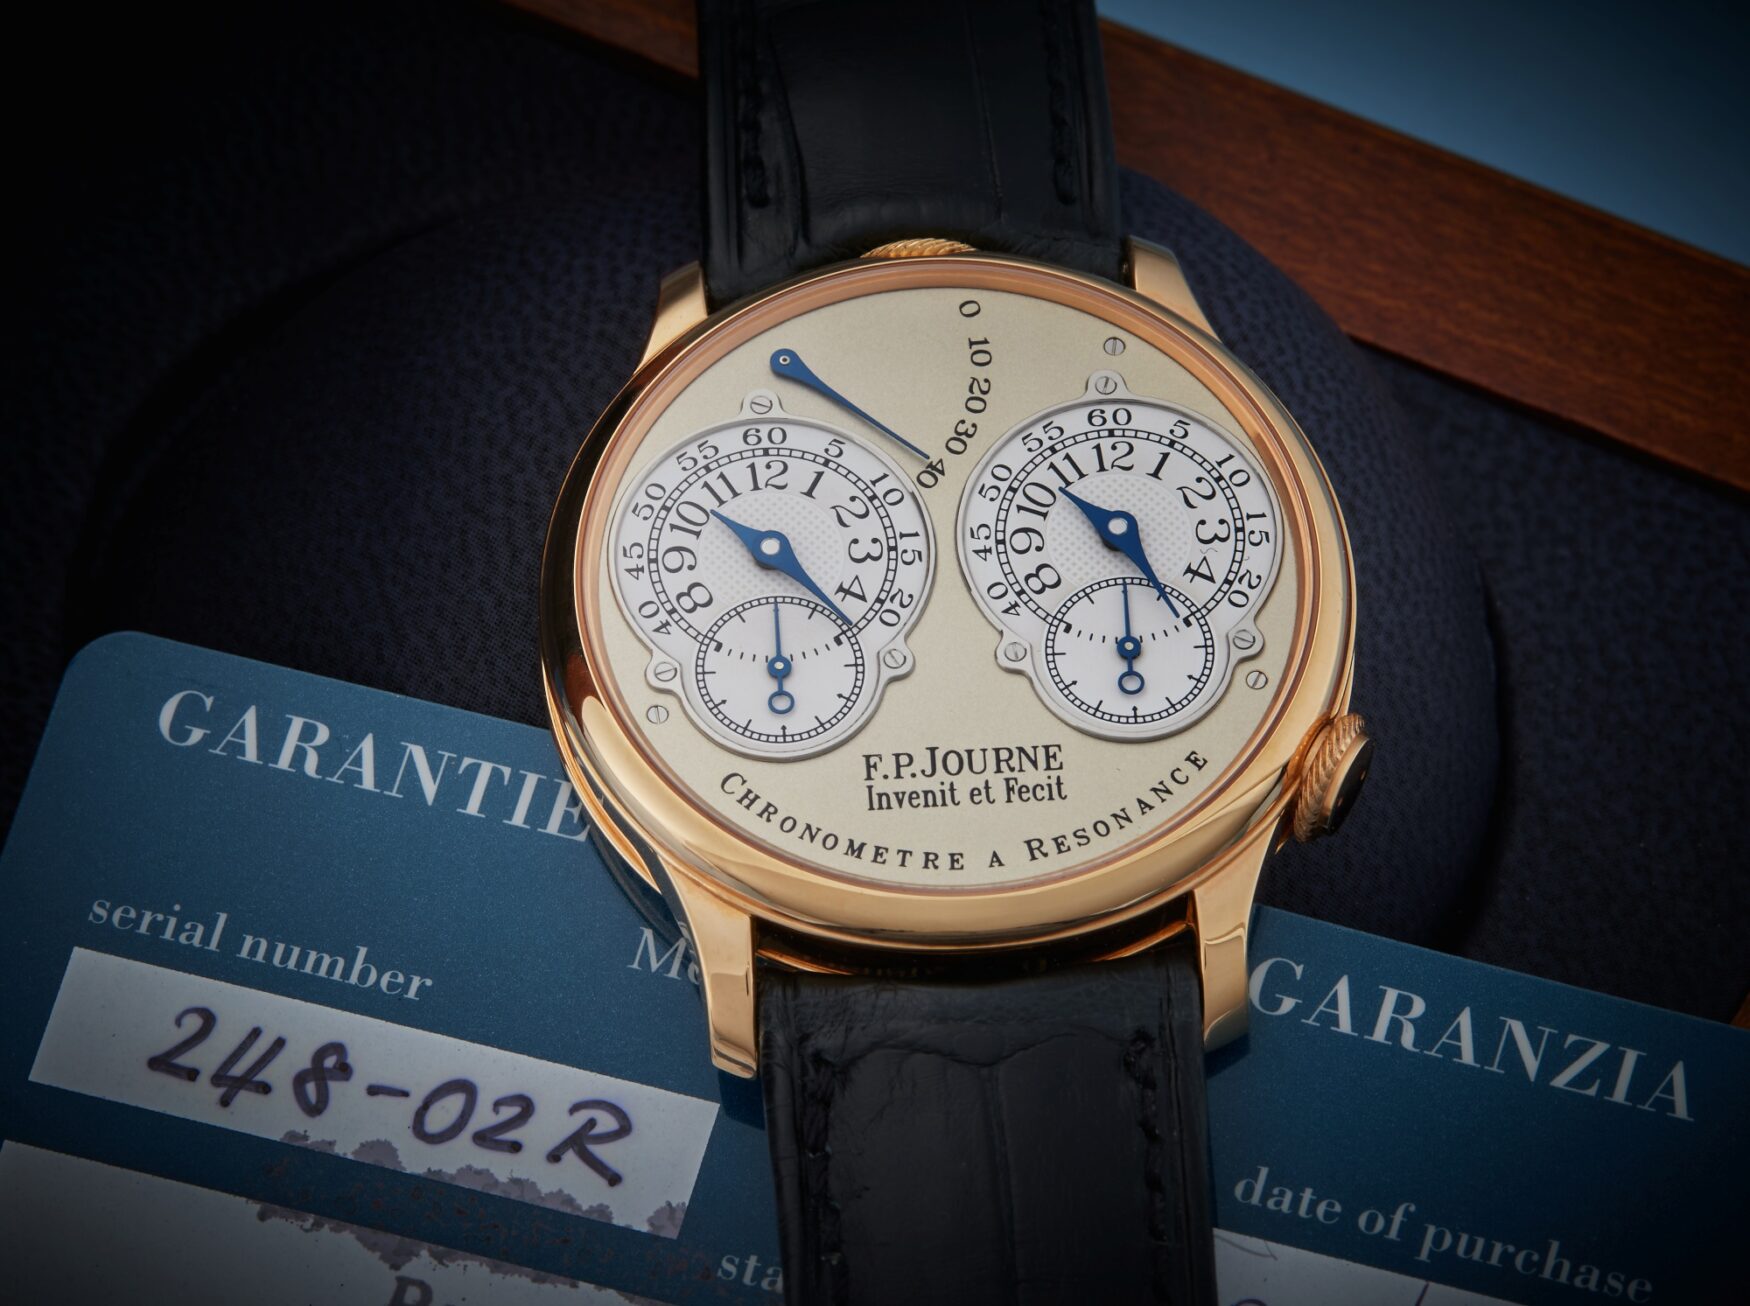 Highlights from the Sotheby’s Important Watches and Fine Watches June sales results